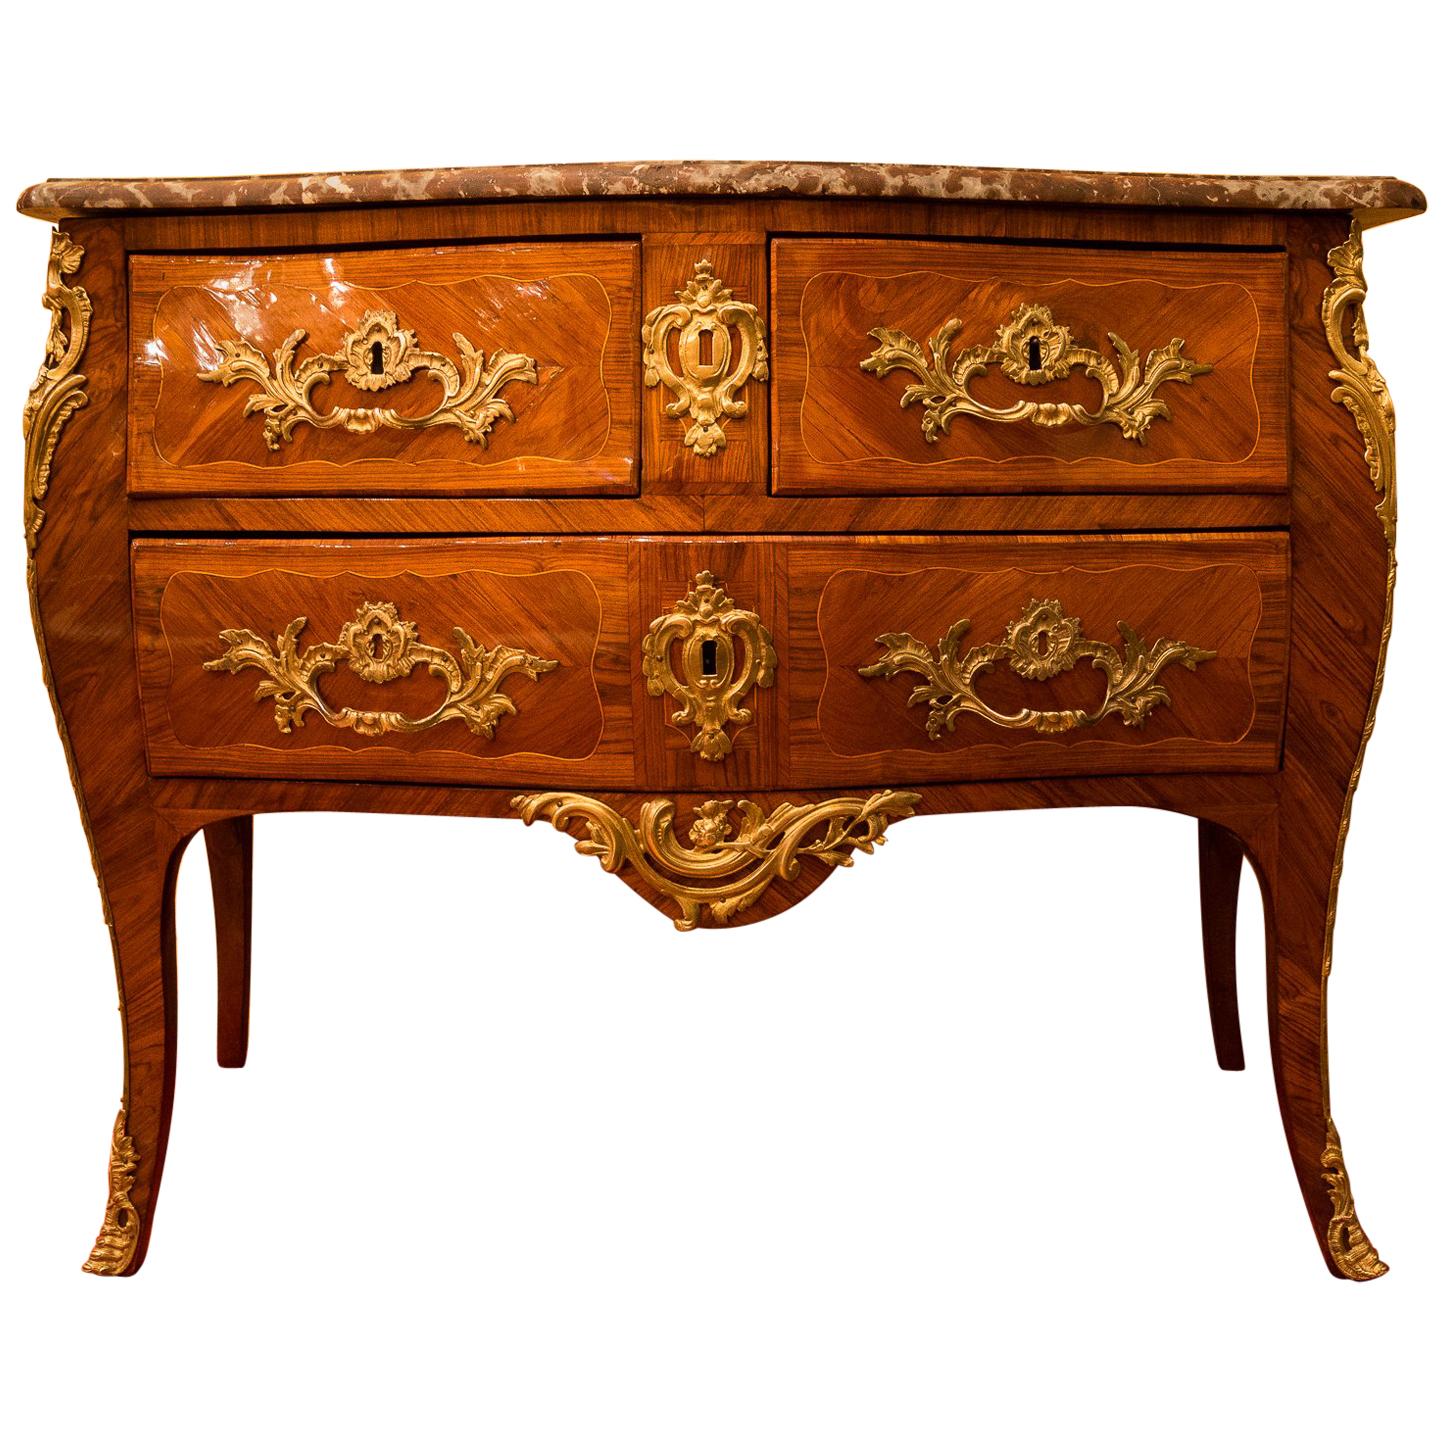 French Louis XV Stamp by Sebastien Vié, Serpentine Marble Top Commode circa 1750